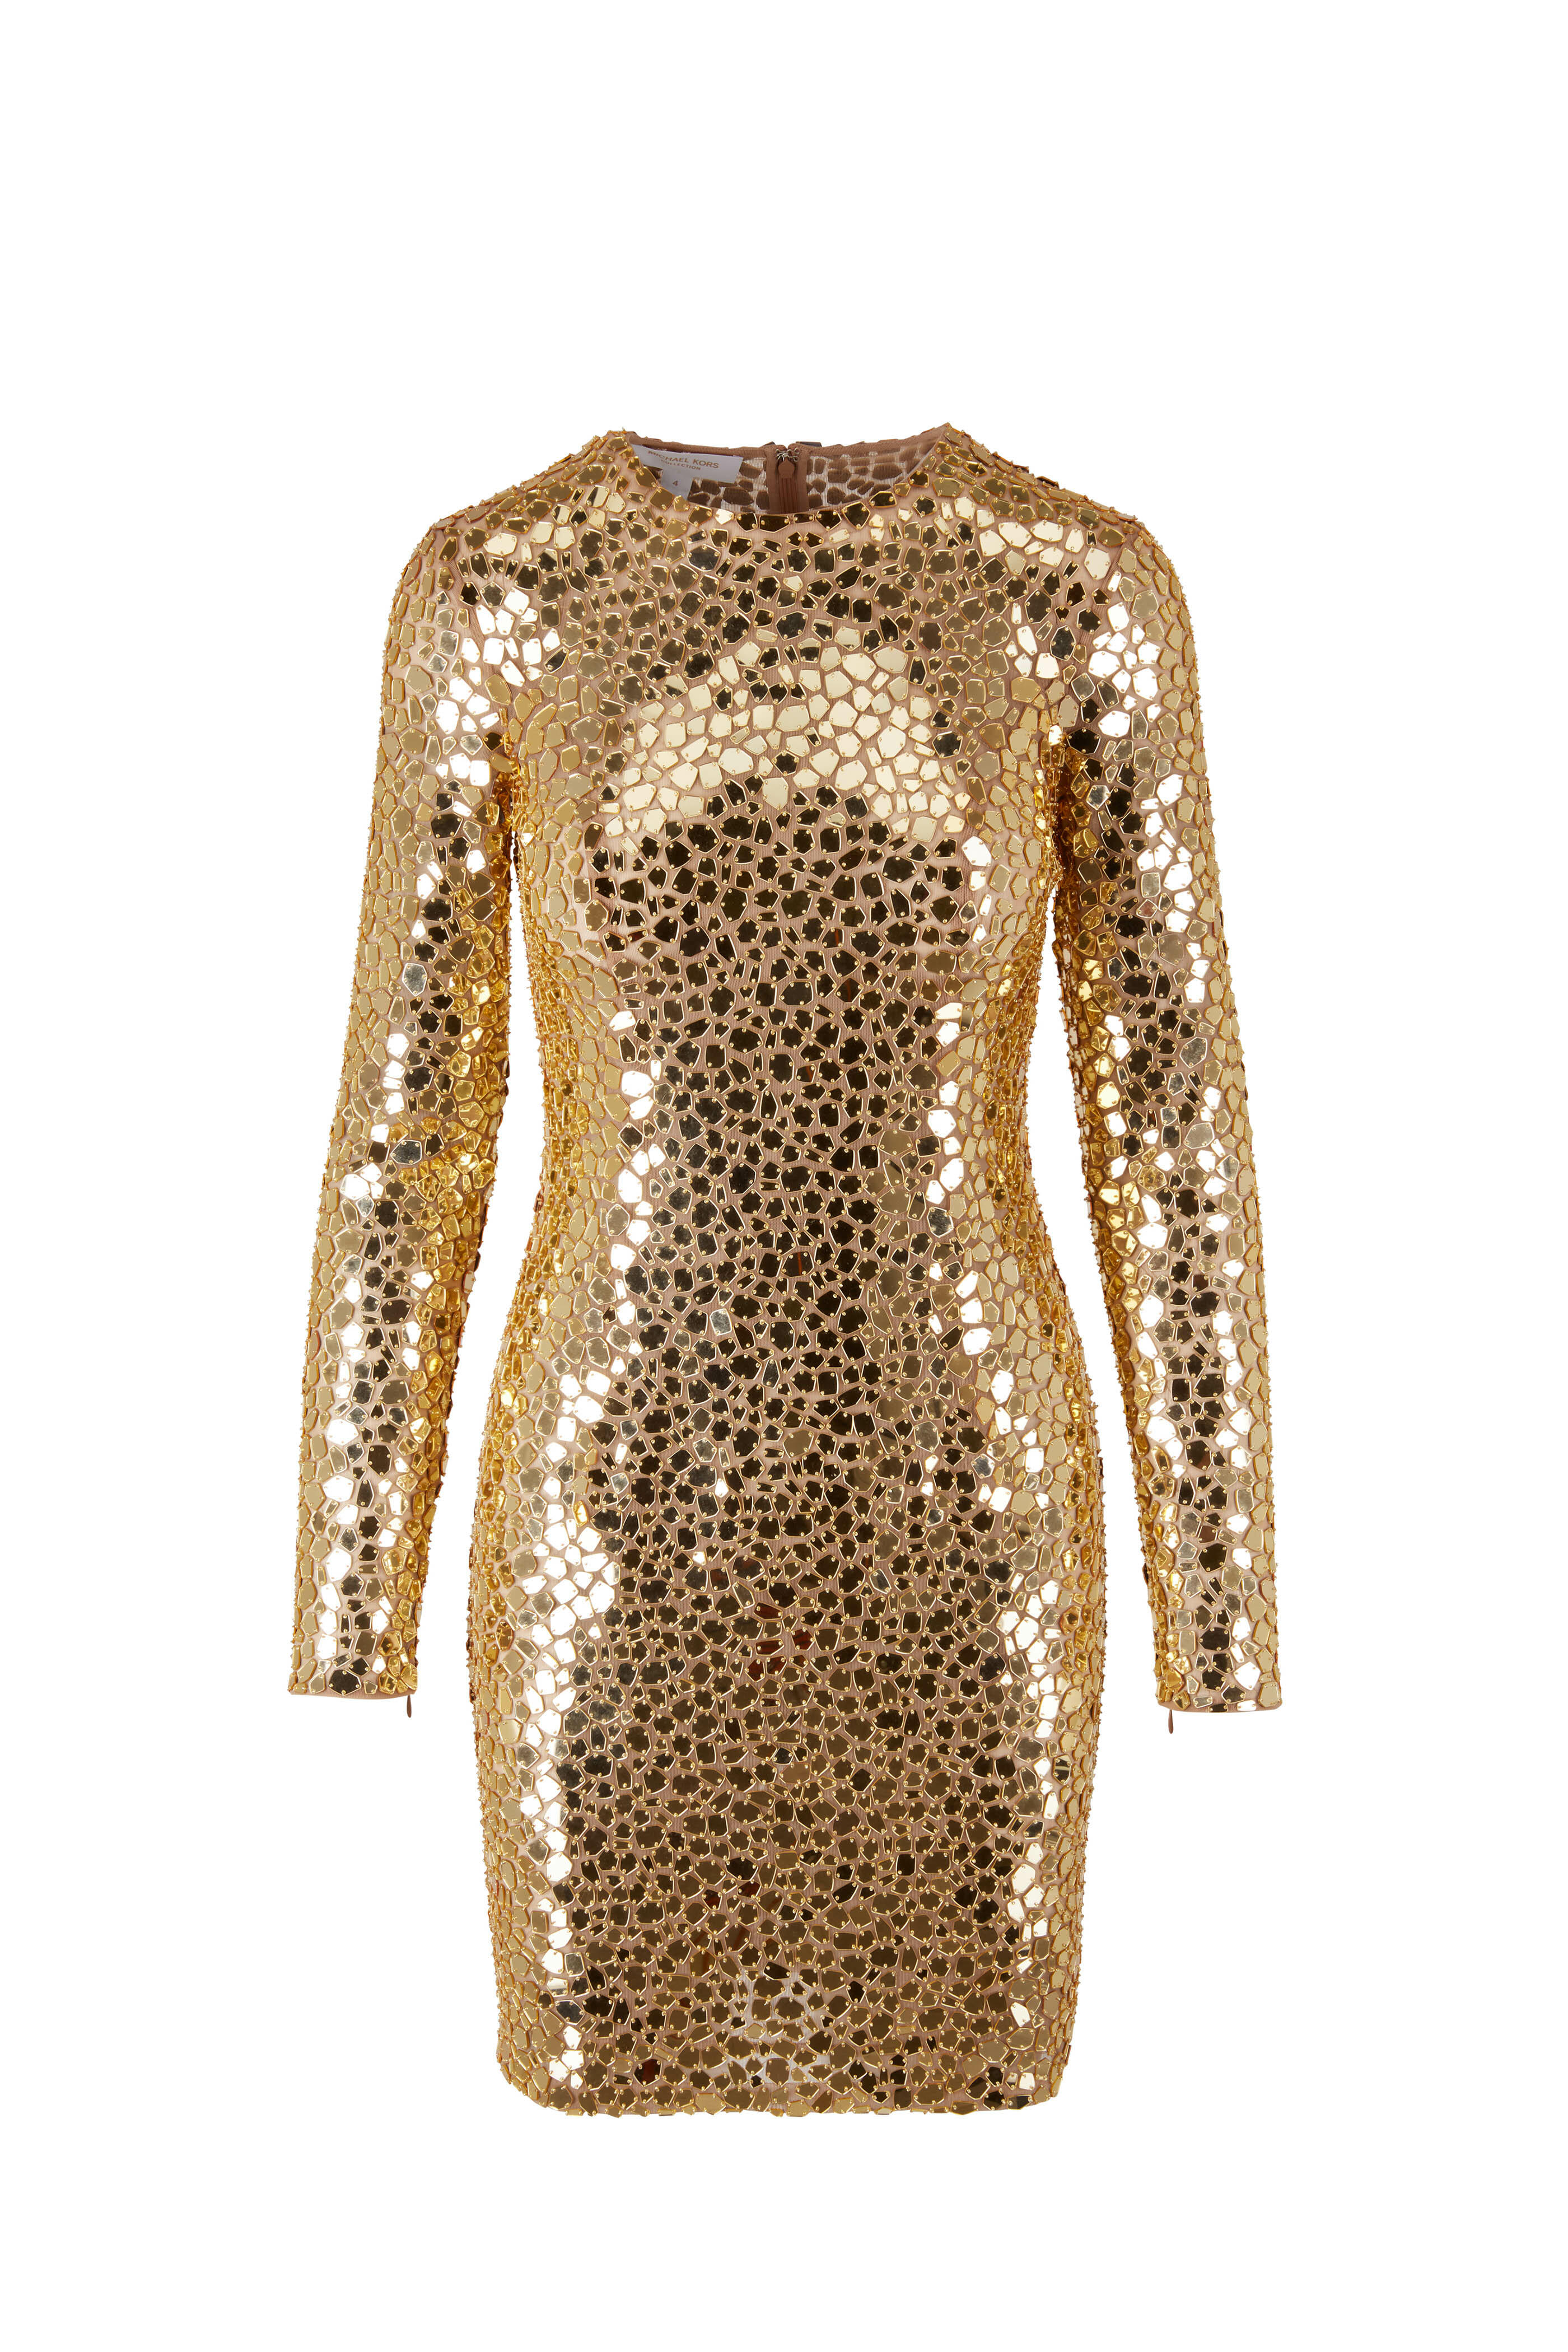 Michael Kors Collection - Gold Mirror Embellished Long-Sleeve Mini